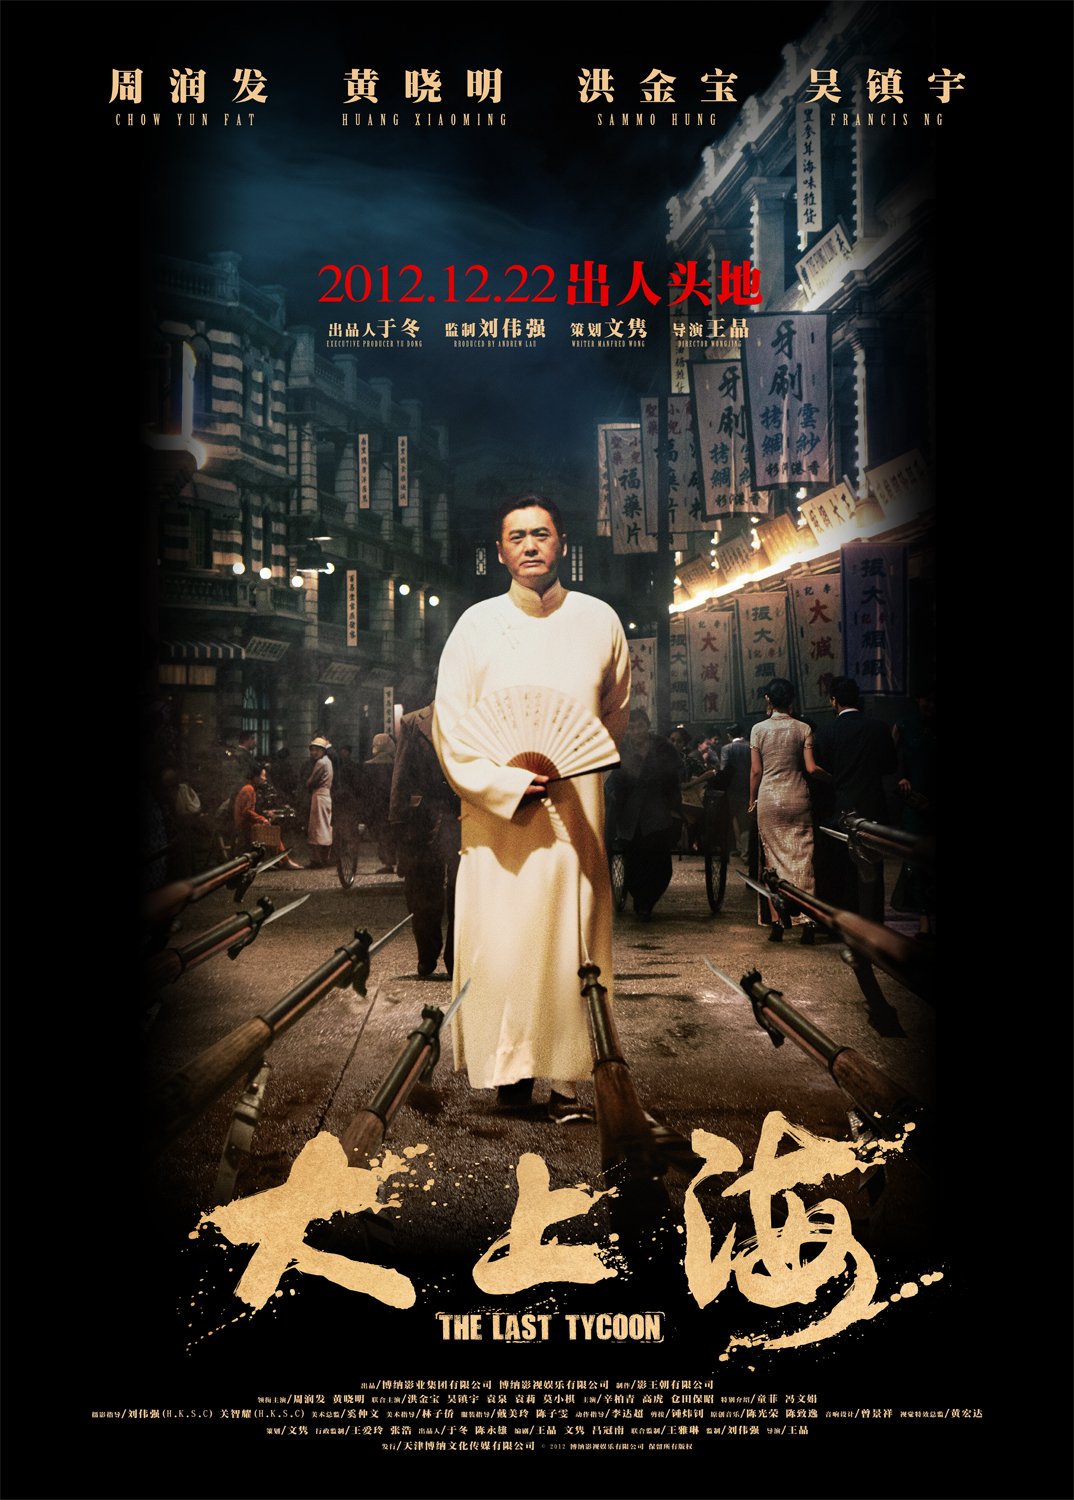 Mandarin poster of the movie The Last Tycoon